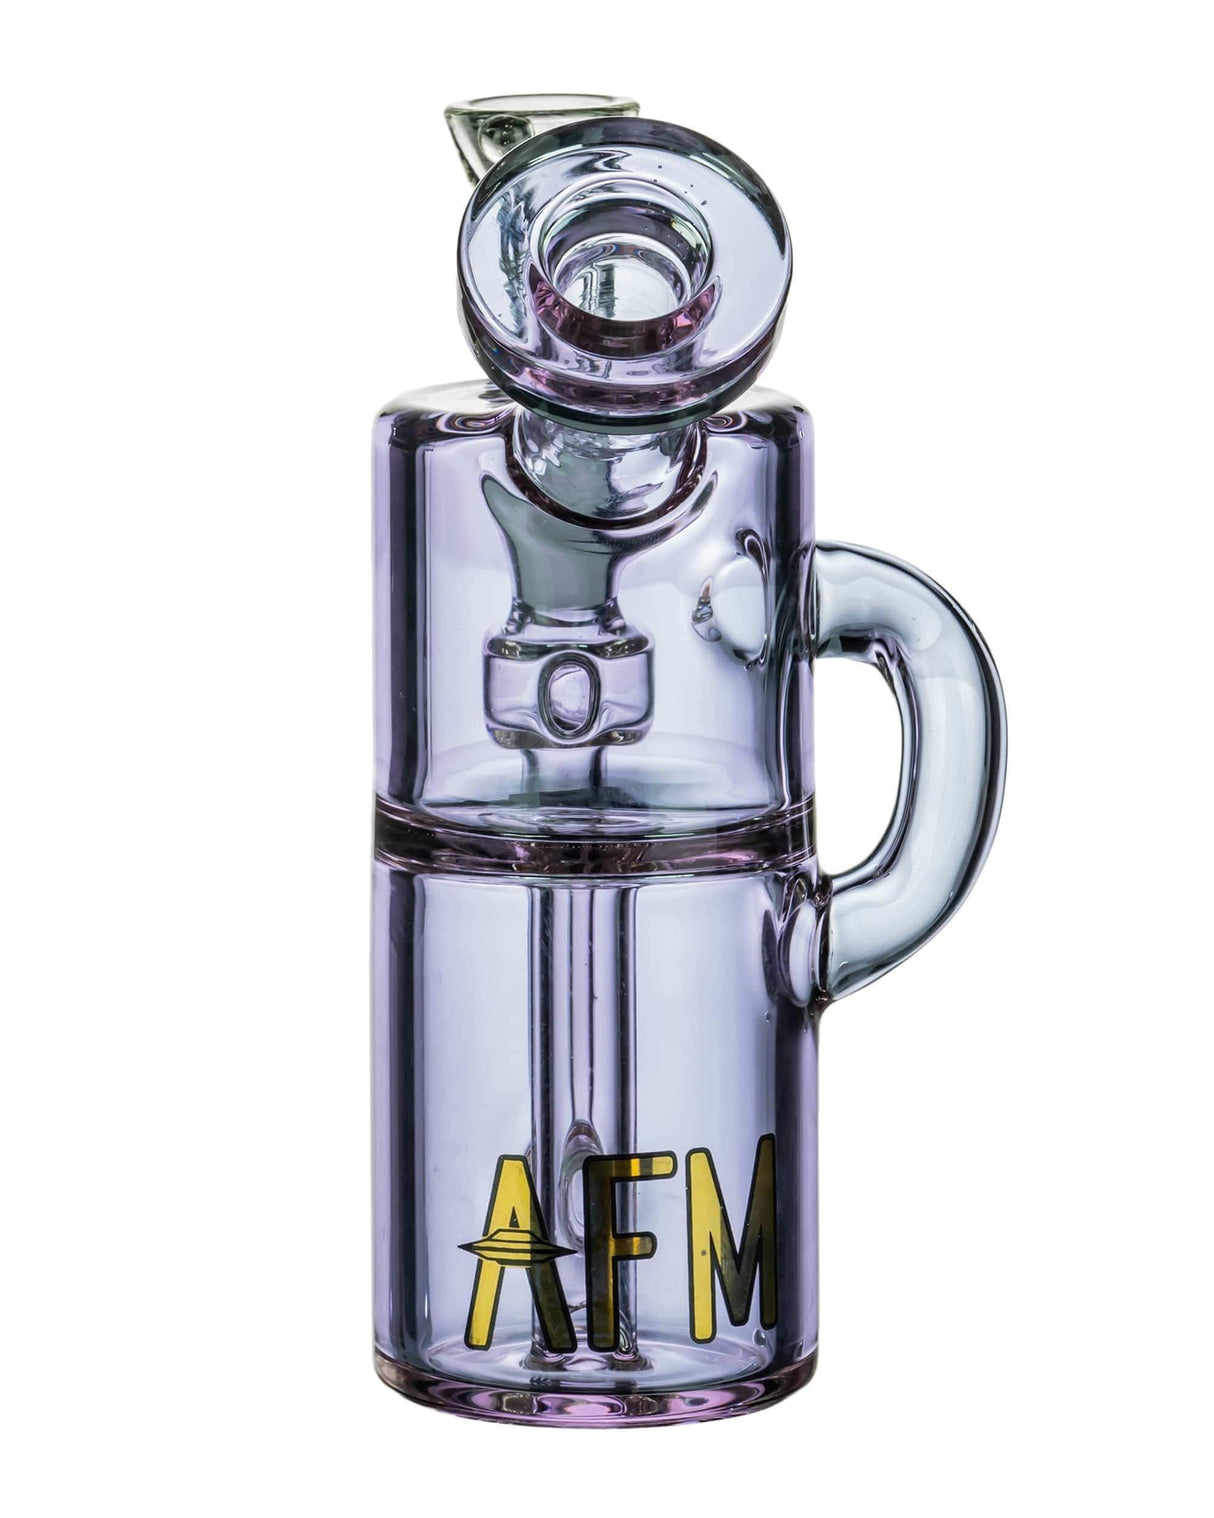 AFM Mini Can Recycler dab rig with clear and purple borosilicate glass, front view on white background